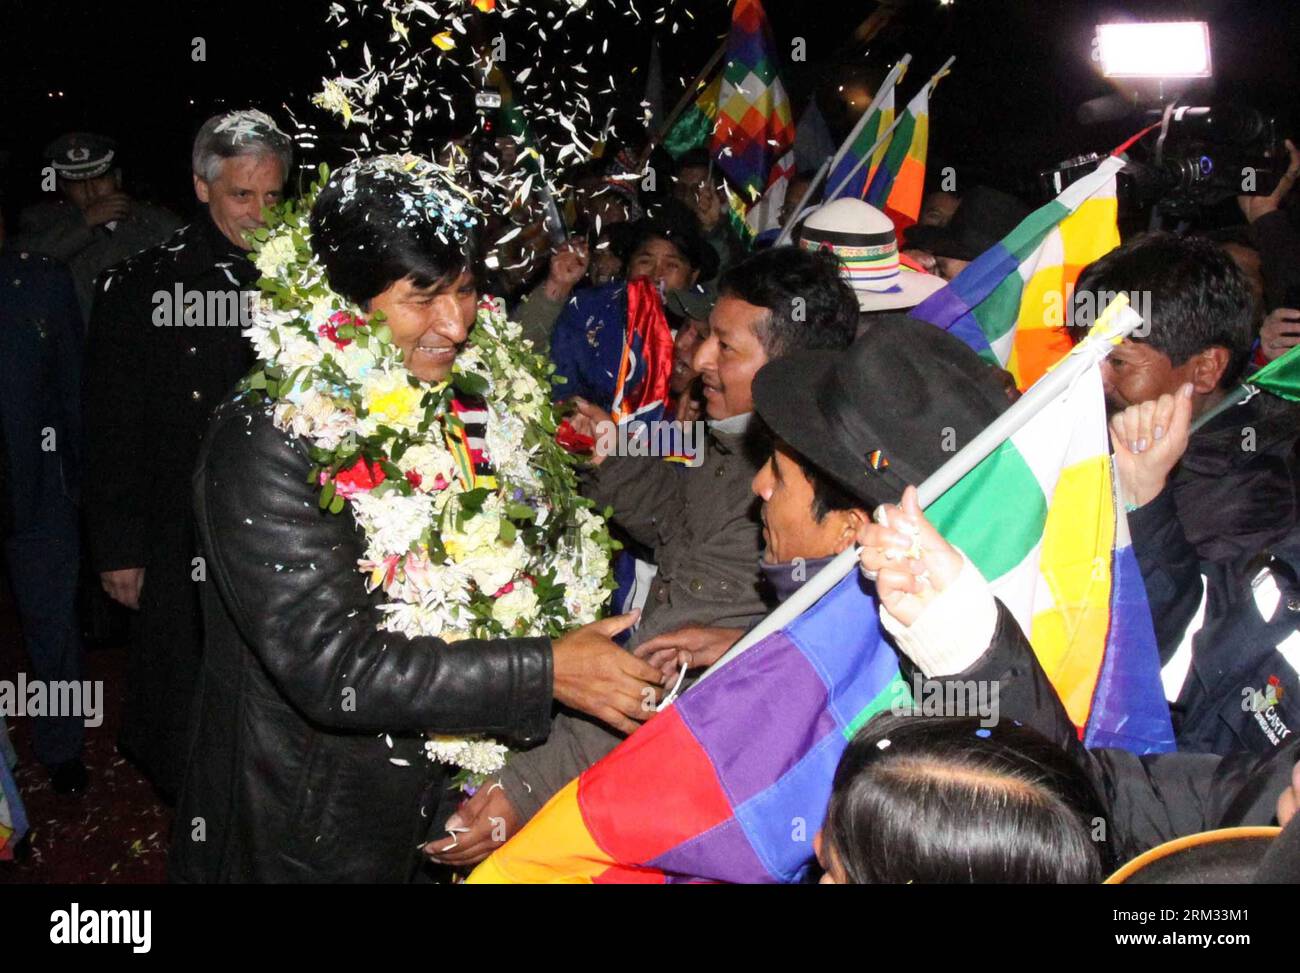 Bildnummer: 59969871  Datum: 03.07.2013  Copyright: imago/Xinhua LA PAZ, July 3, 2013 -- Bolivian President Evo Morales (Front L) is received by residents, ministers and members of social movements after his arrival to El Alto Airport, in La Paz department, Bolivia, on July 3, 2013. The plane of Bolivian President Evo Morales landed Wednesday in the airport of Brazil s northeastern city of Fortaleza, after a five-hour flight from Canary Islands, where the airplane made a refueling stop. The plane was rerouted by some European countries late Tuesday and remained in Vienna, Austria for more than Stock Photo